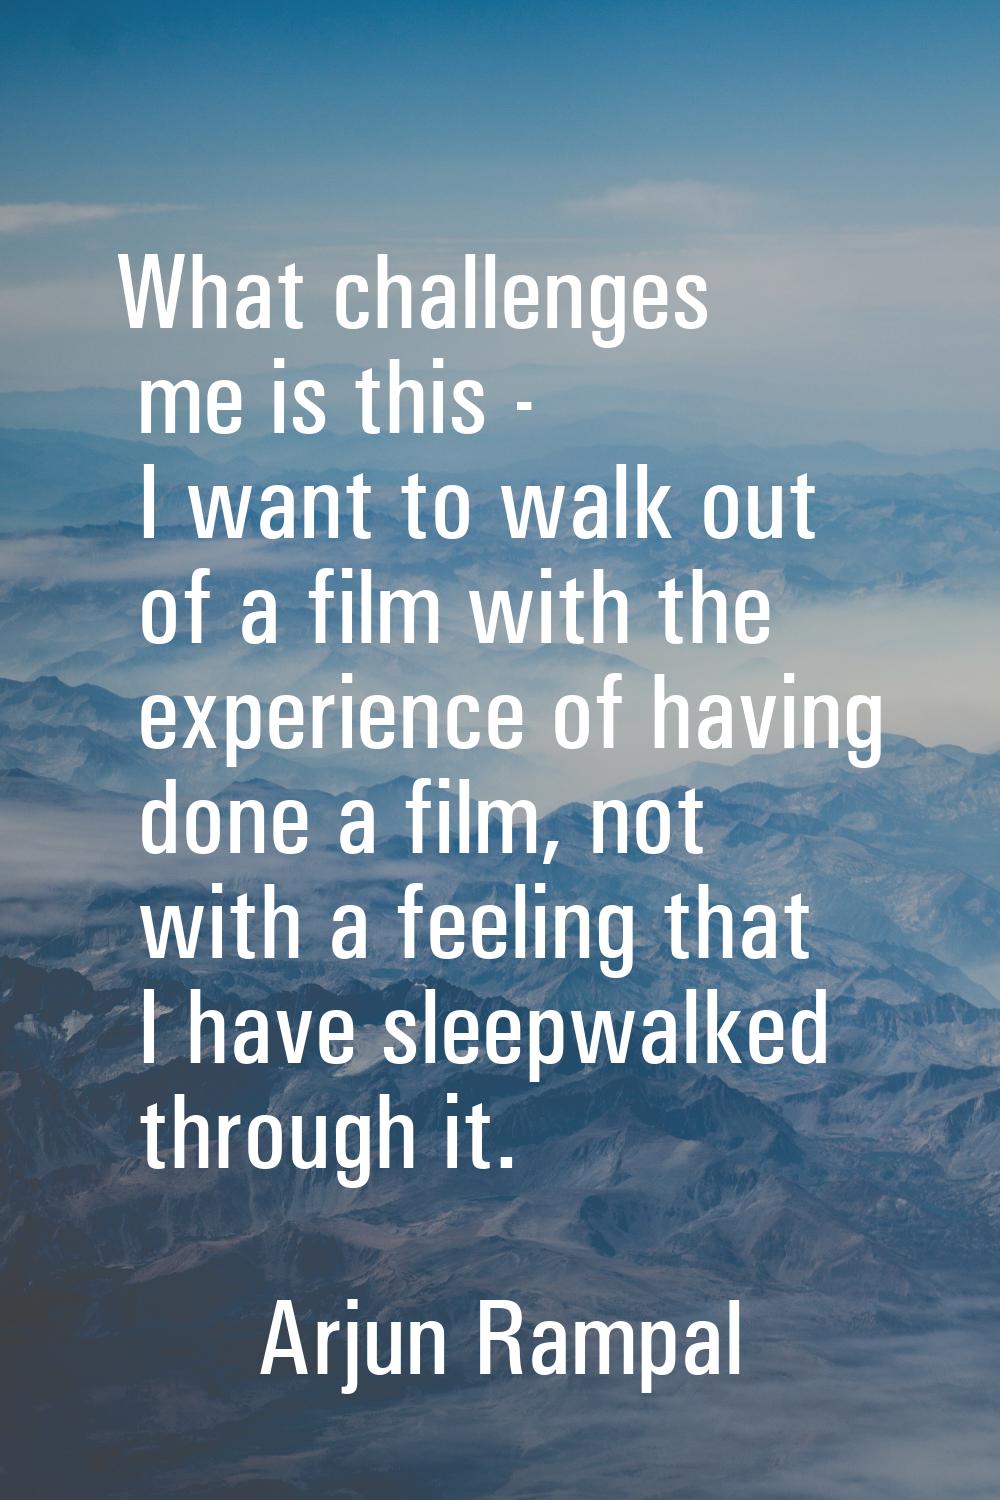 What challenges me is this - I want to walk out of a film with the experience of having done a film